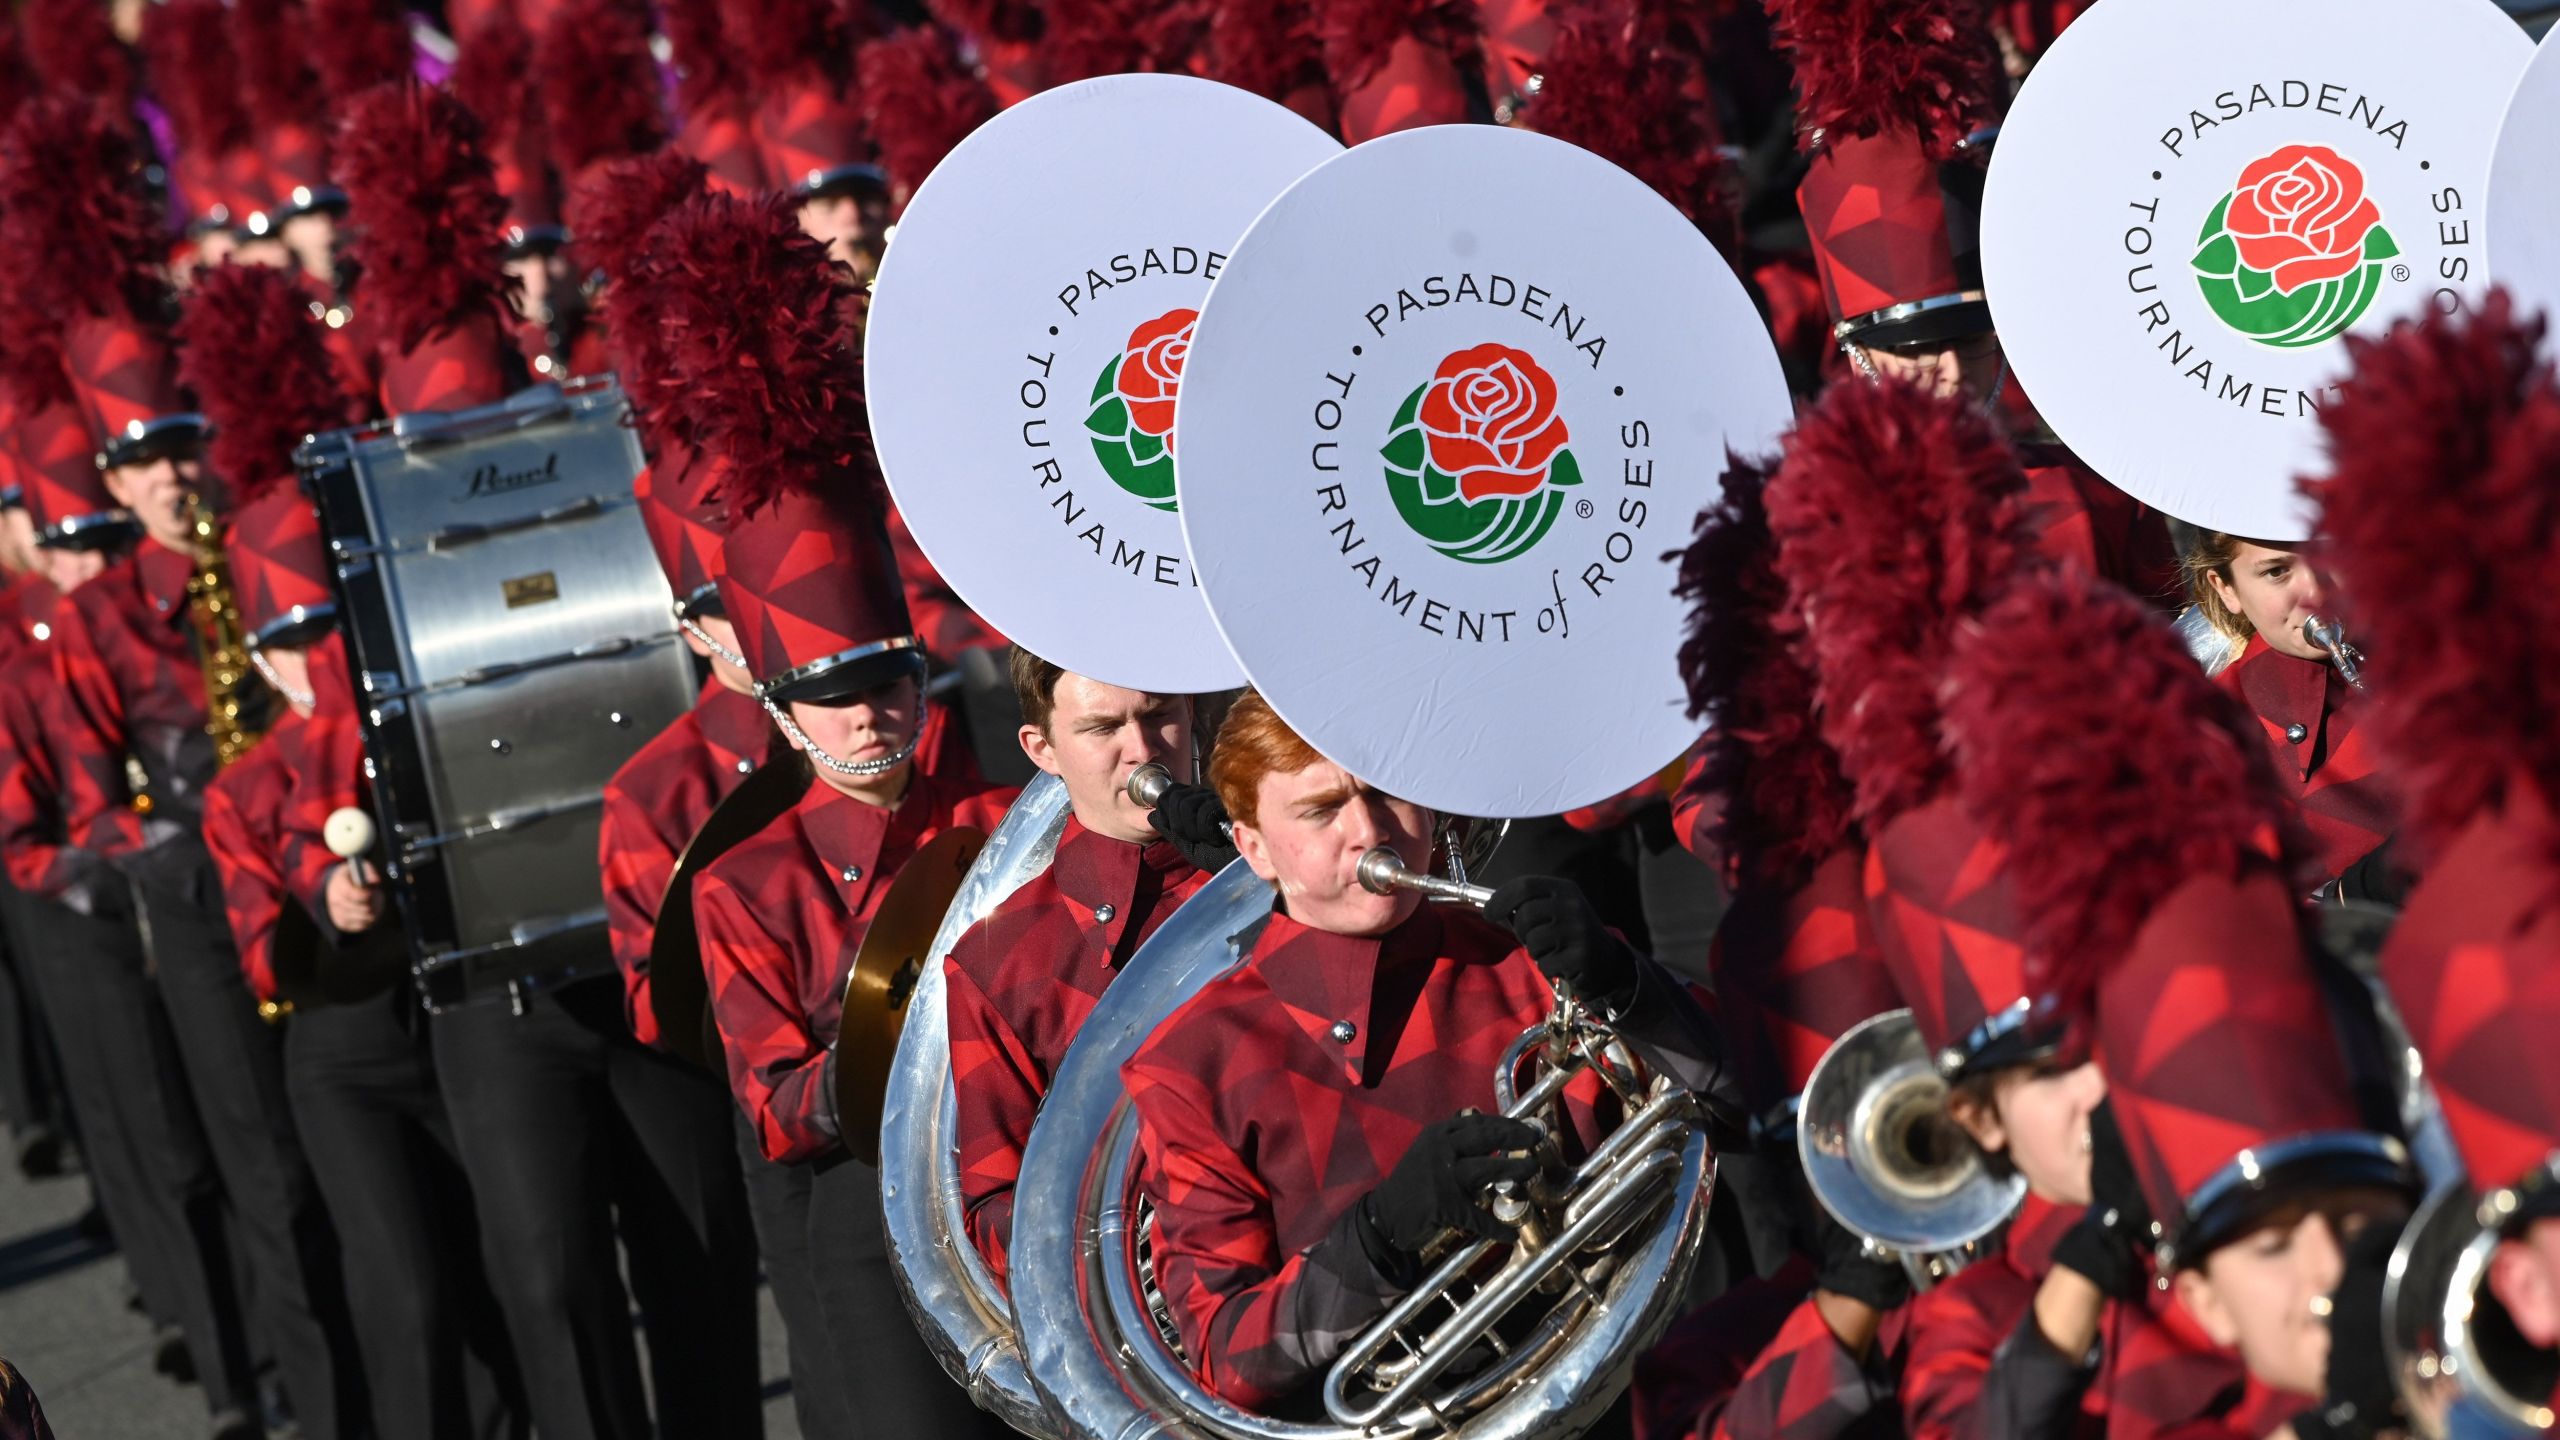 A marching band participates in the 131st Rose Parade in Pasadena, California, Jan. 1, 2020. (ROBYN BECK/AFP via Getty Images)